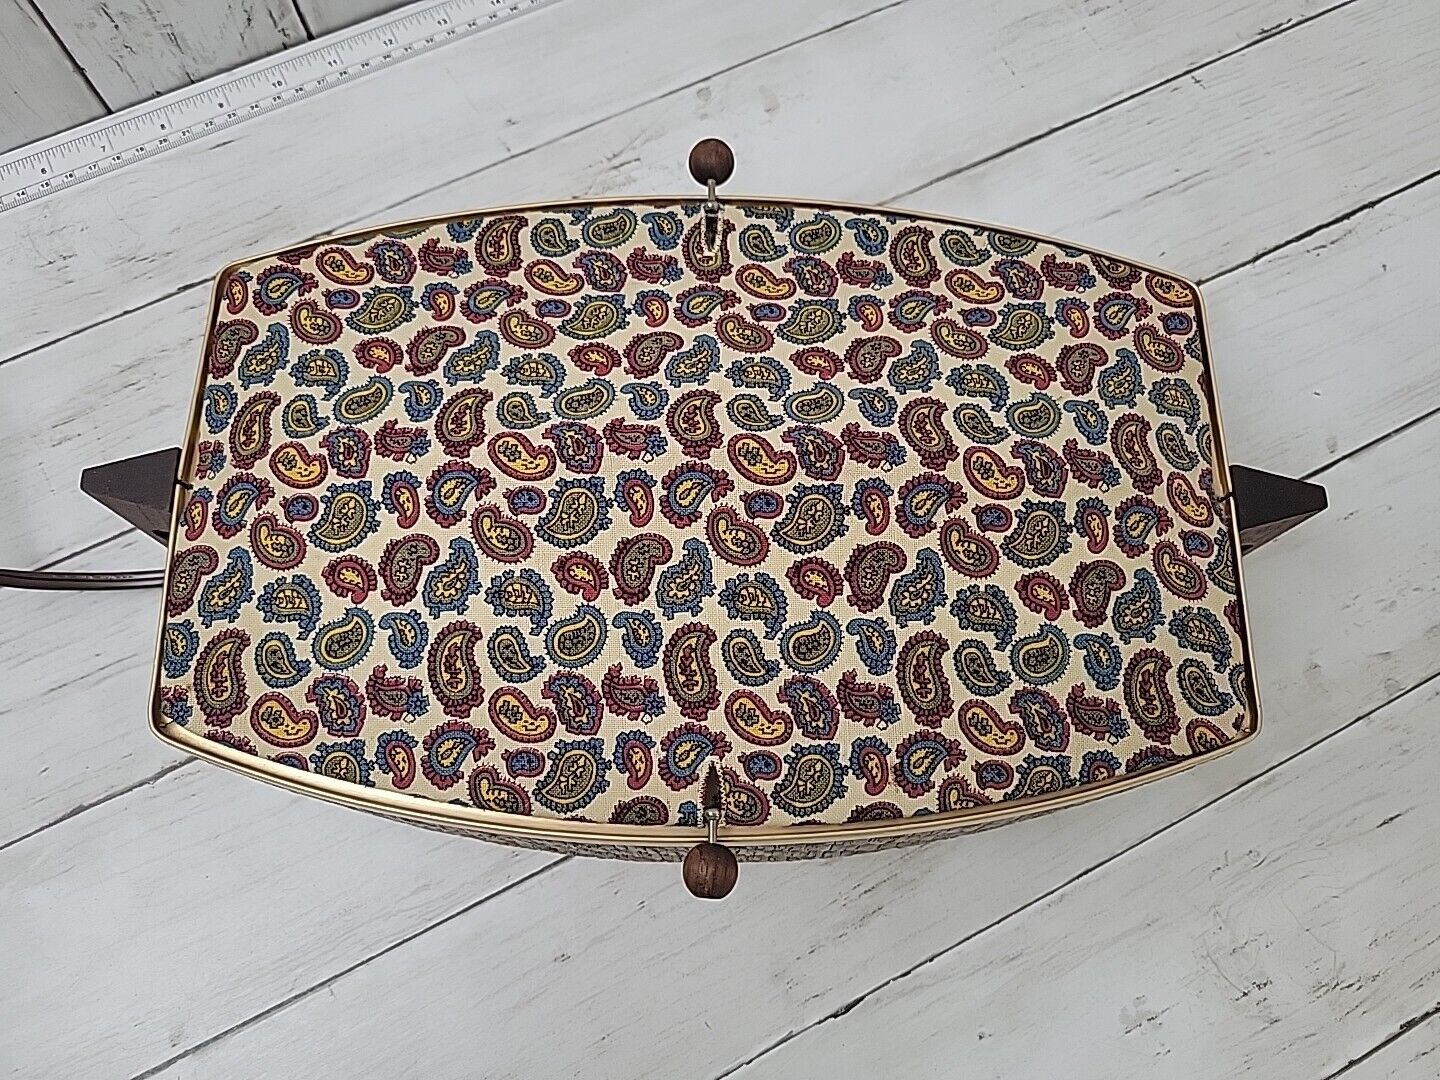 Vintage Salton Hotray Automatic Bun Warmer Made In The U.S.A Paisley Print/Gold